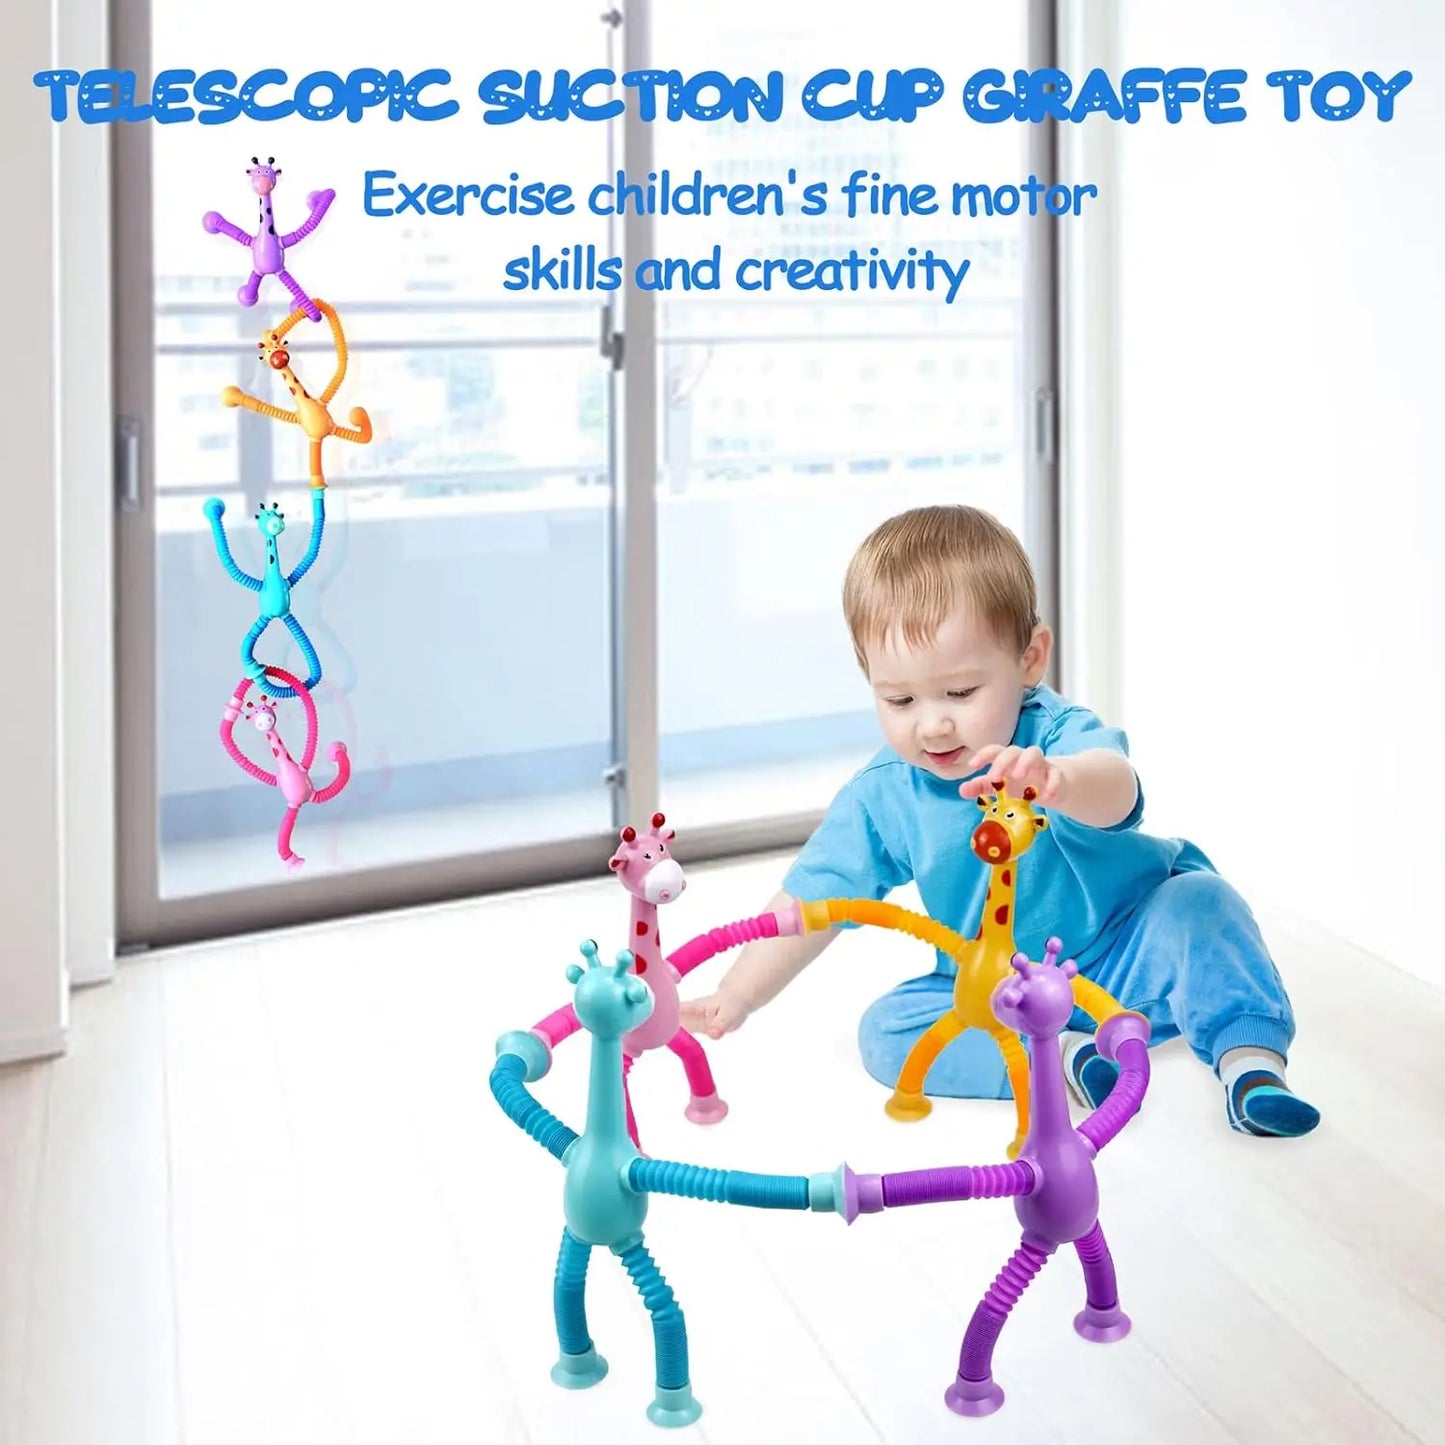 4 Pack Telescopic Suction Cup Giraffe Toy Sensory Tubes for Boys Girls